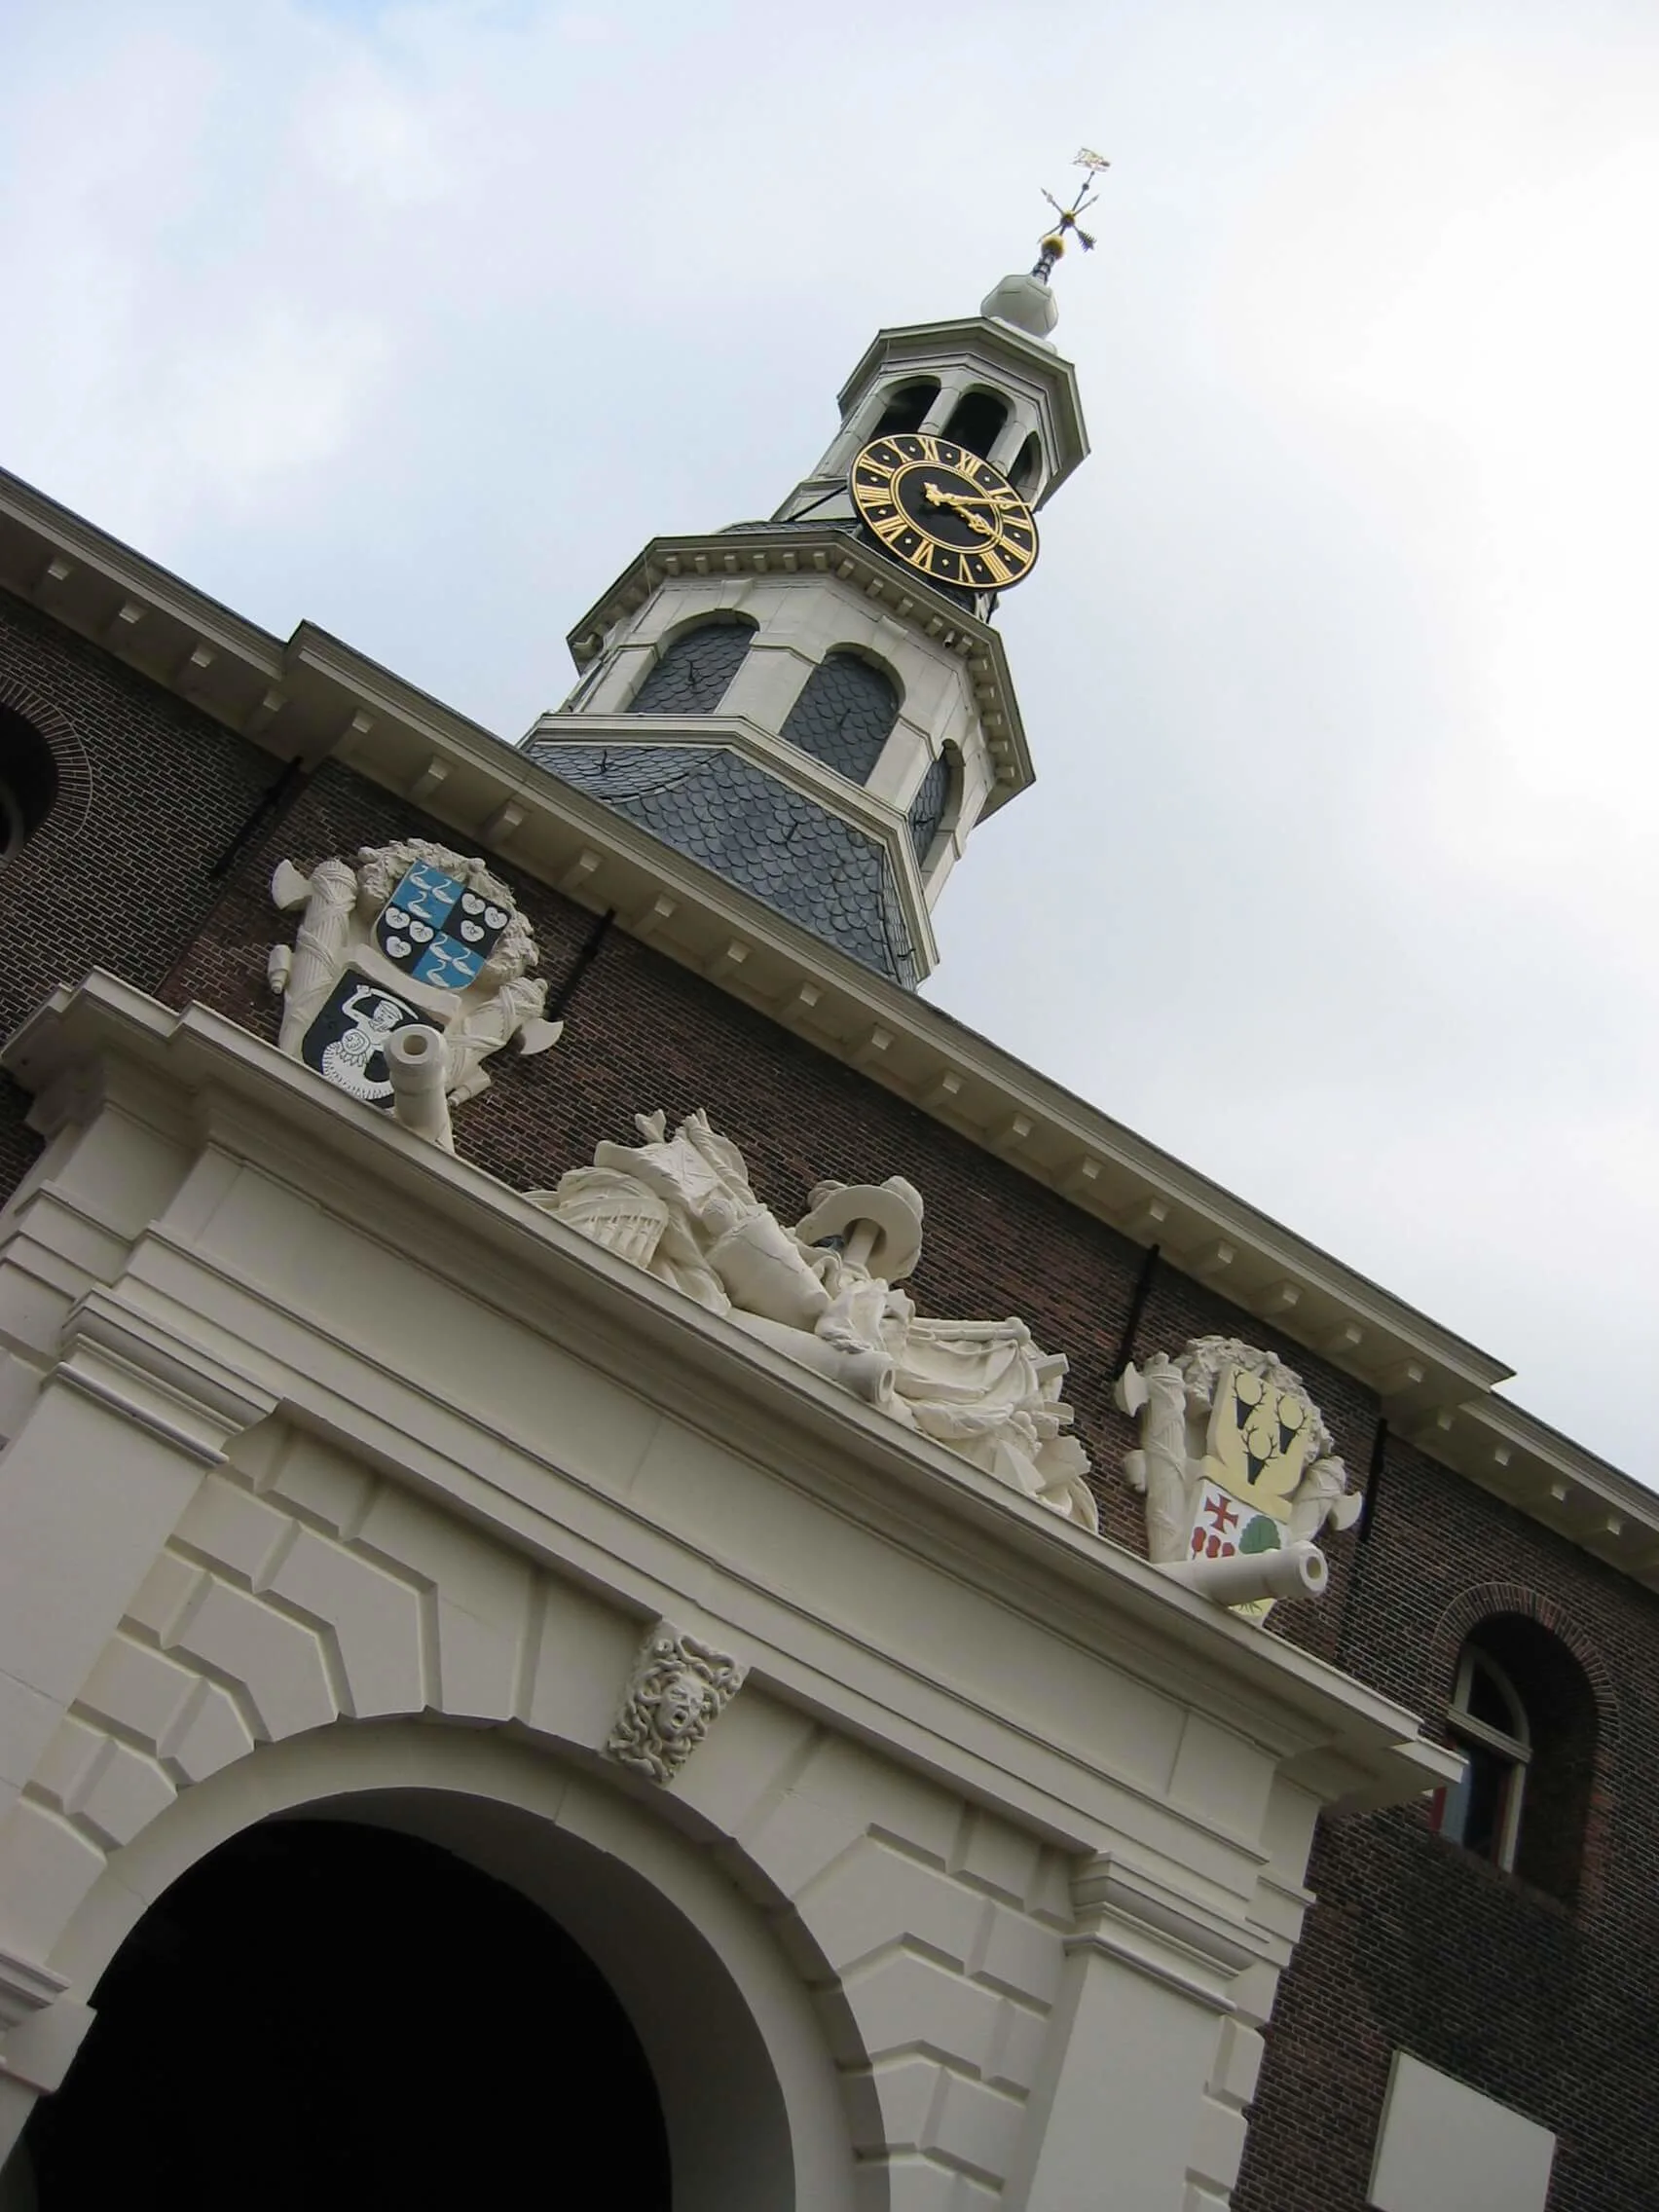 Wondering what to see in Leiden? The city gates are one of the top Leiden attractions